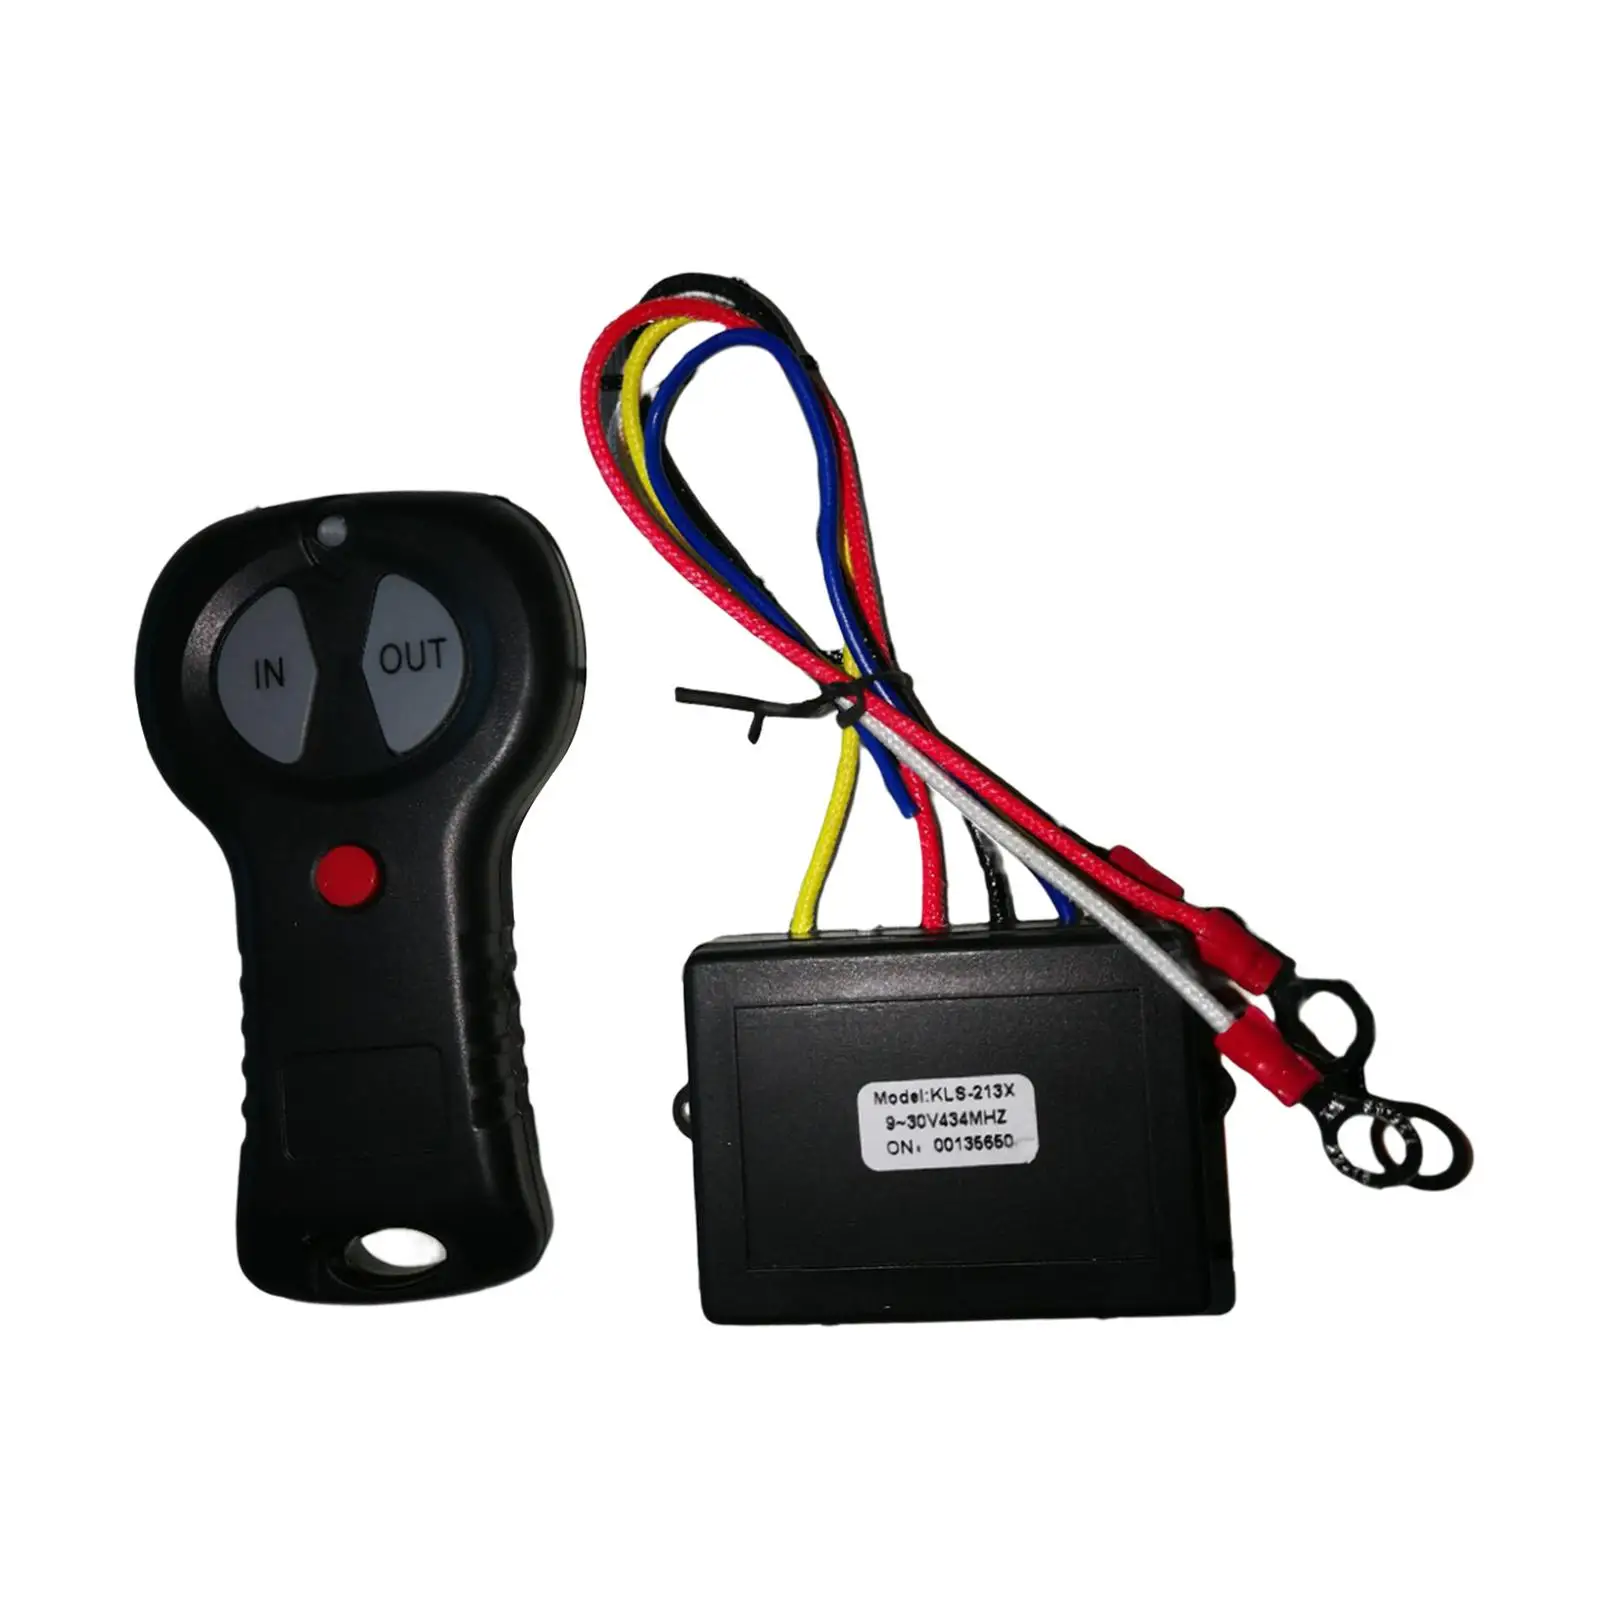 Winch Remote Control Handset switches Truck Winch Waterproof for SUV ATV Auto